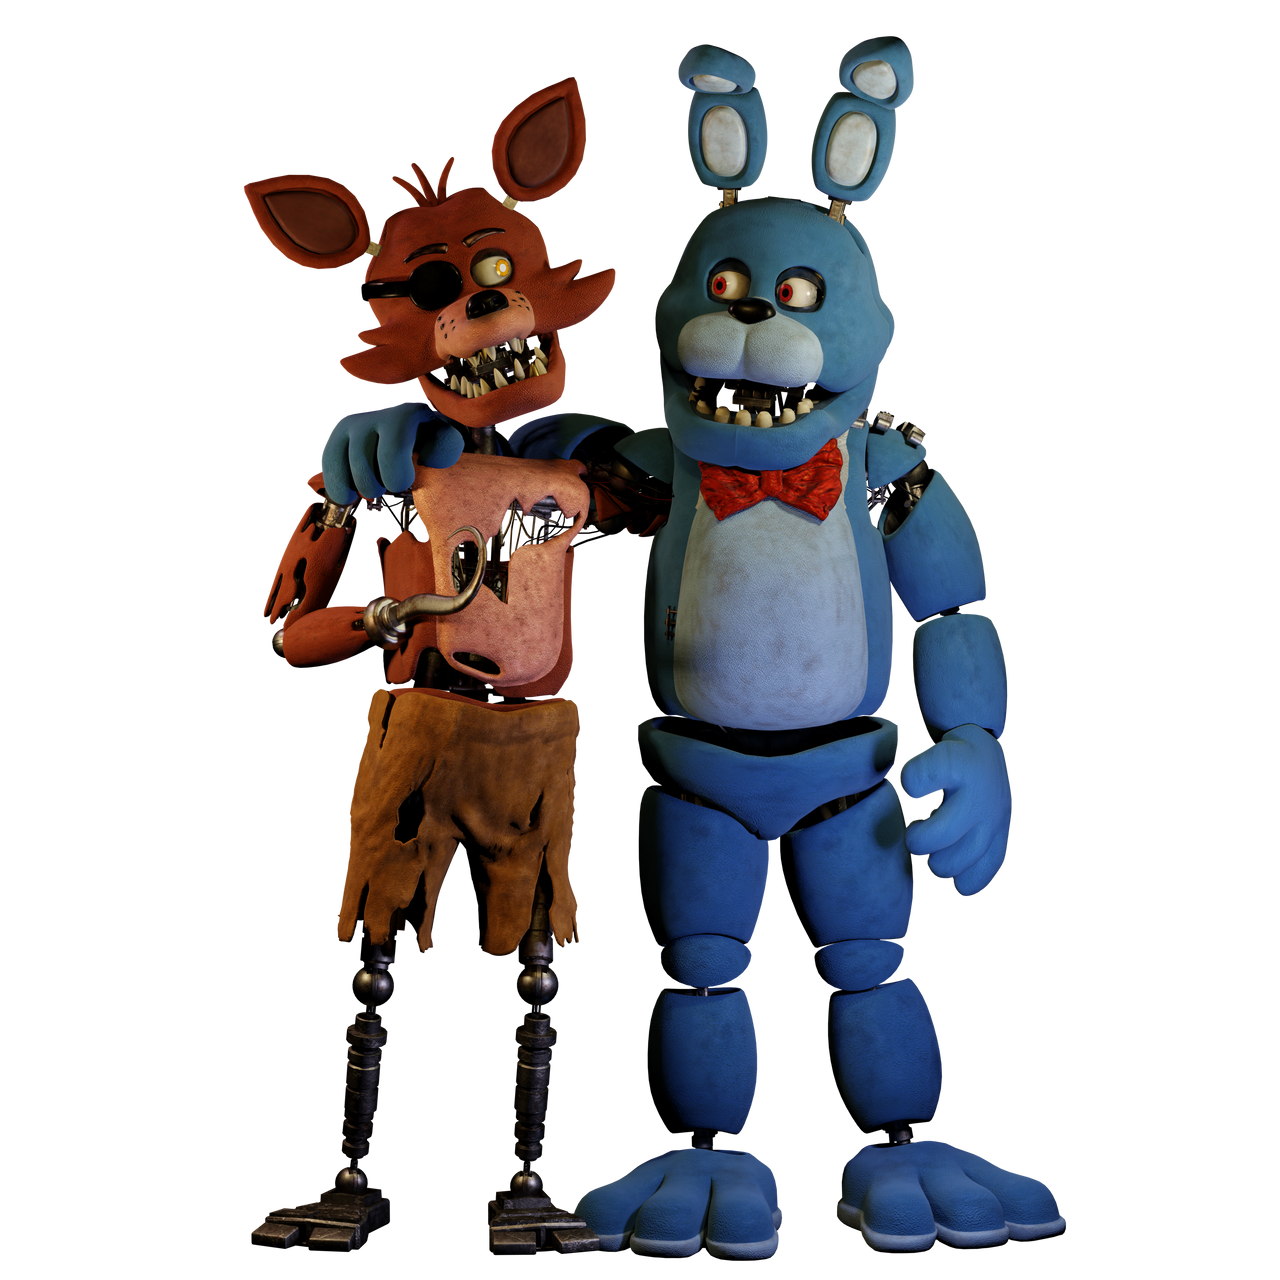 Fnaf Movie render - Foxy and Bonnie by mysteriouspoggers12 on